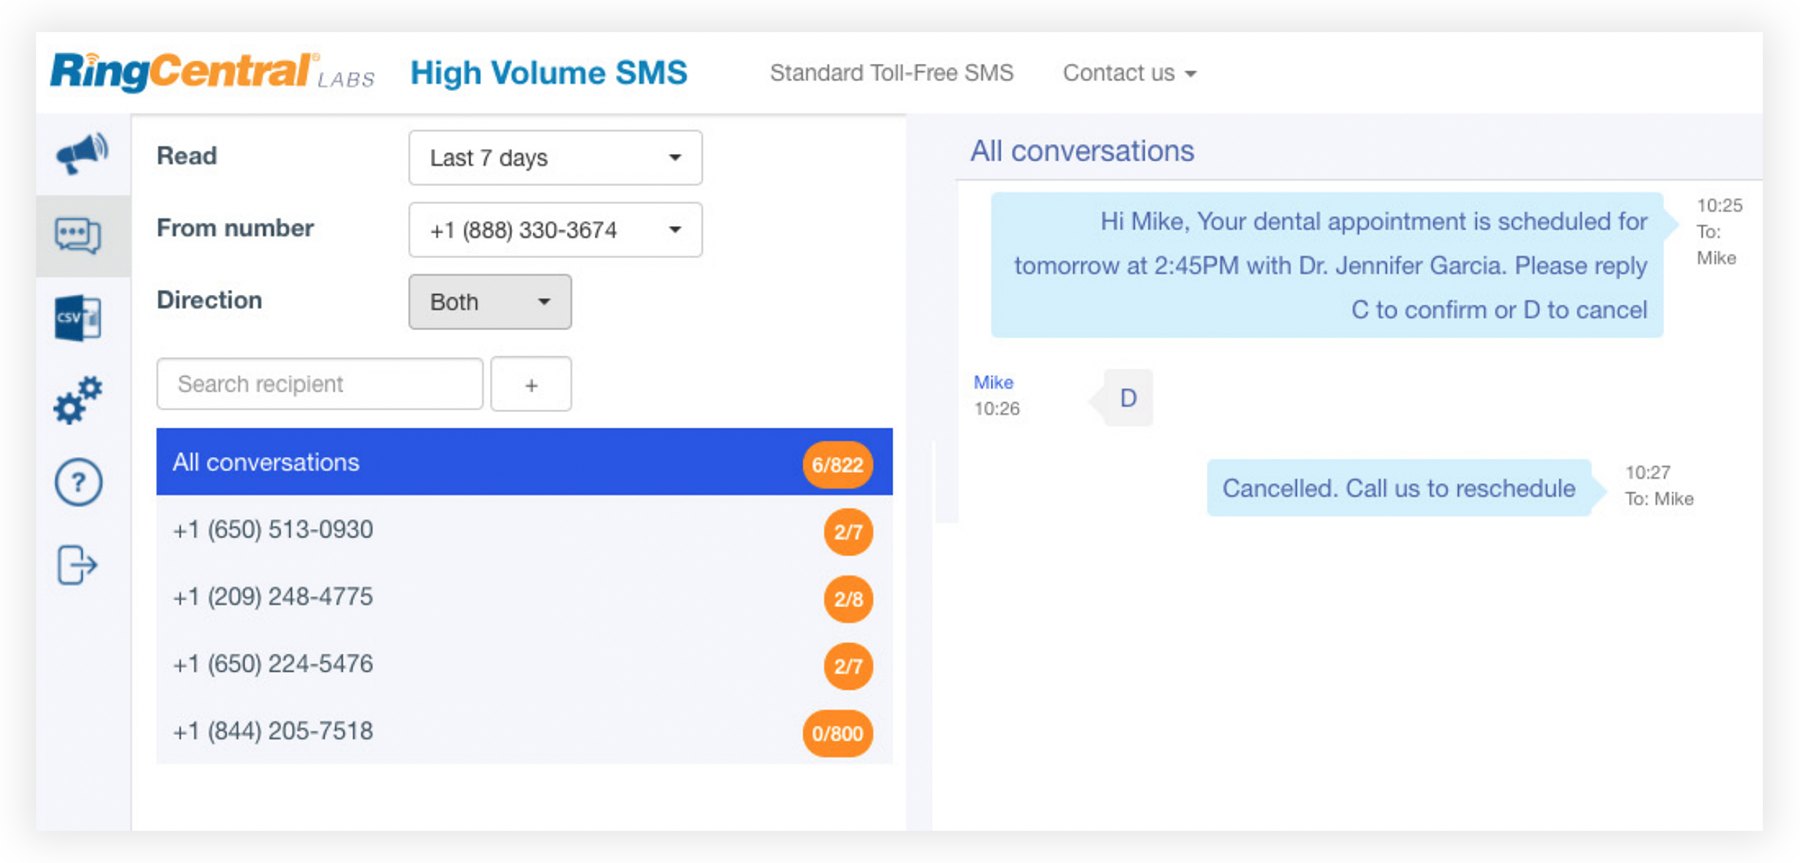 RingCentral High Volume SMS